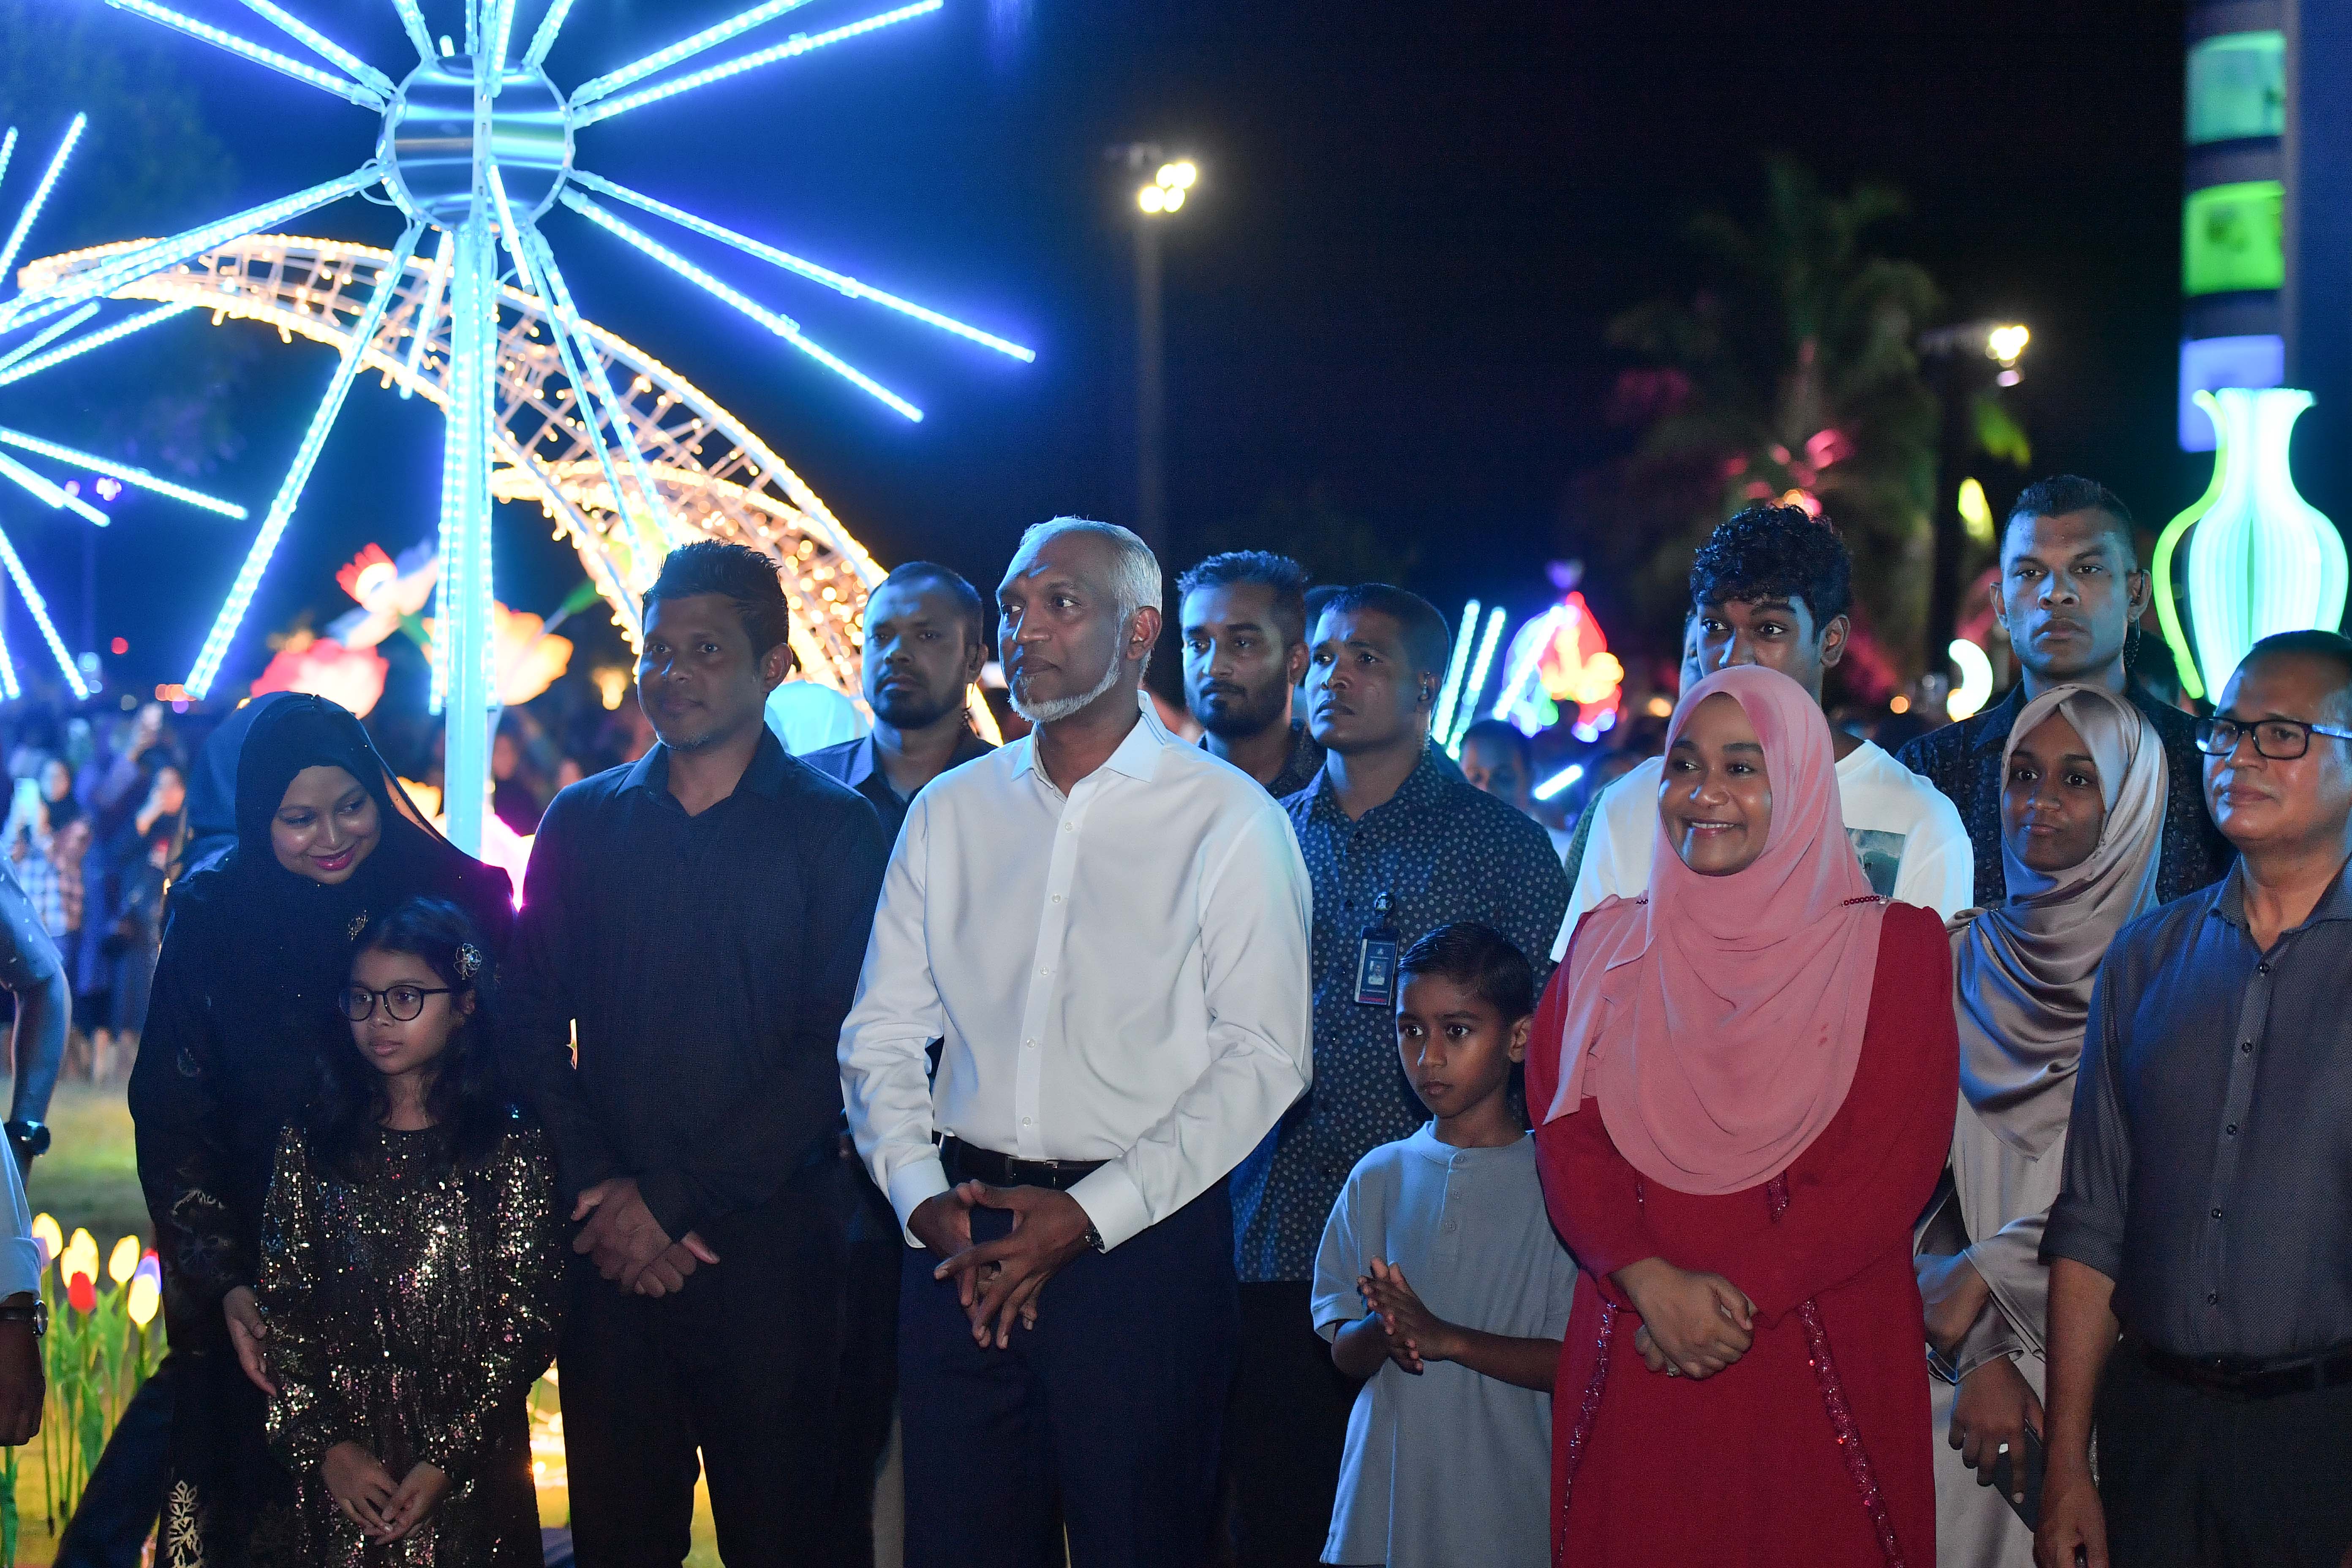 The President and First Lady attend the "Eid Ali," inauguration and water fountain reopening.